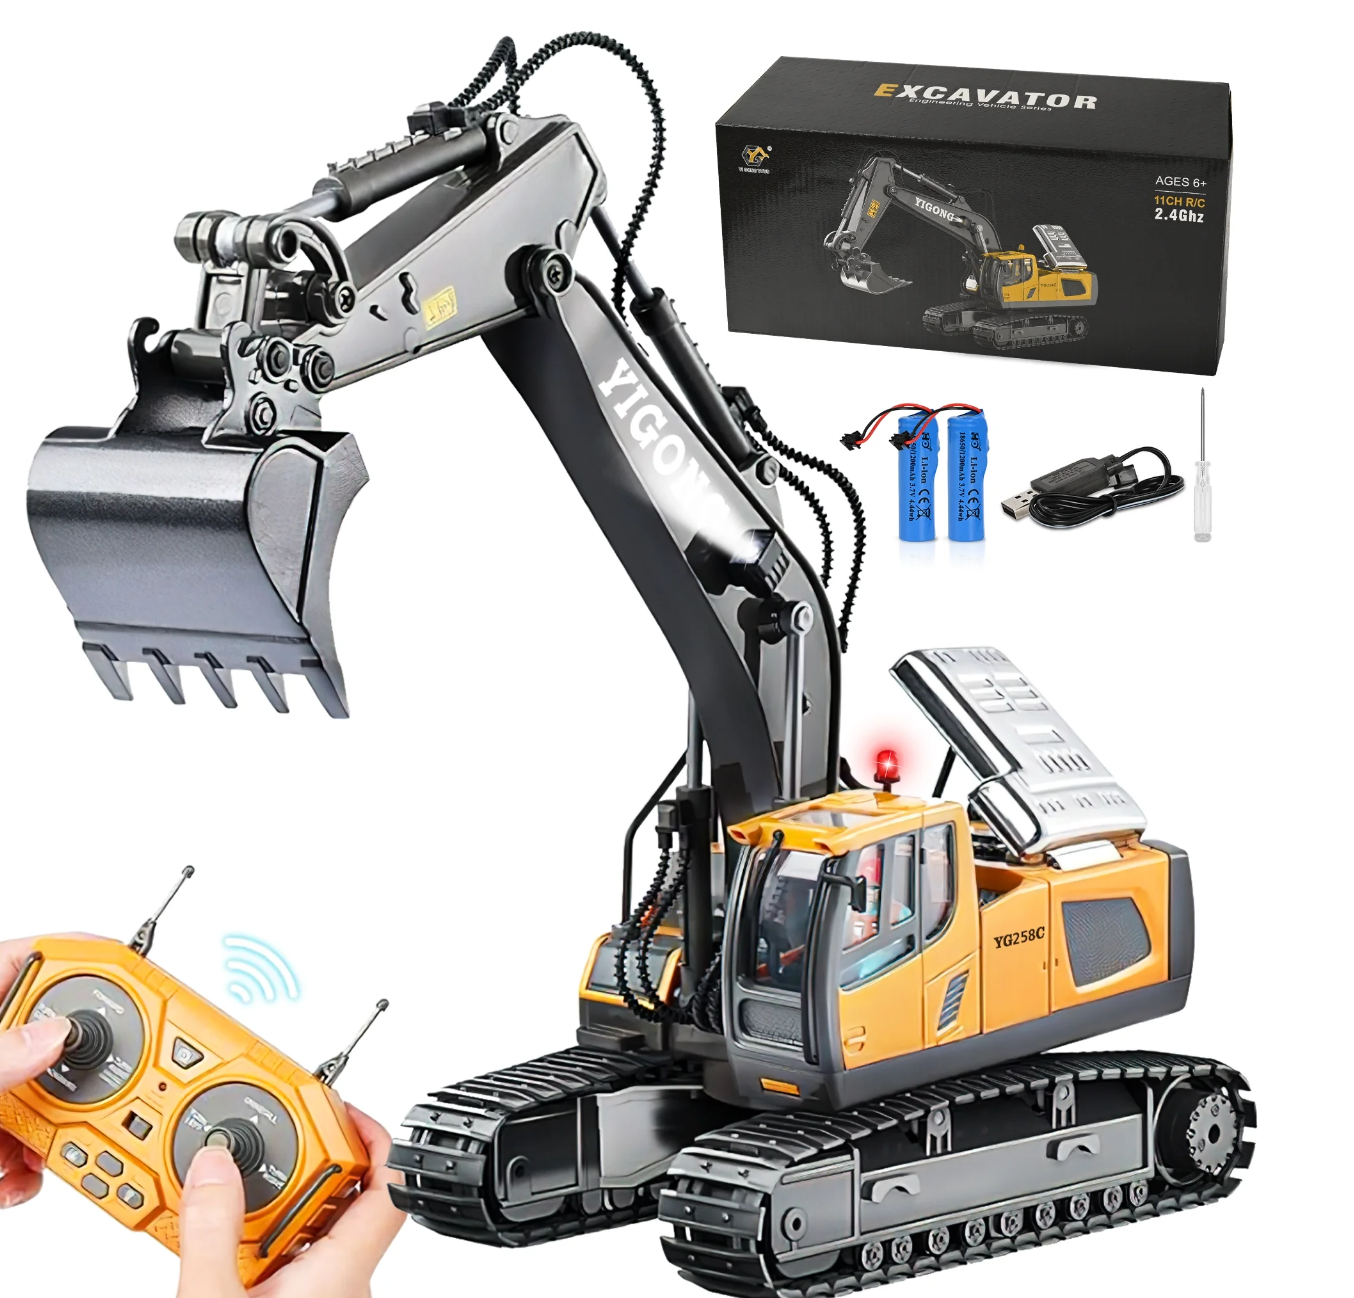 Remote Control Excavator,RC Excavator Toys,11 Channel Rechargeable Construction Vehicle Toys with Lights Sounds ($43.99)